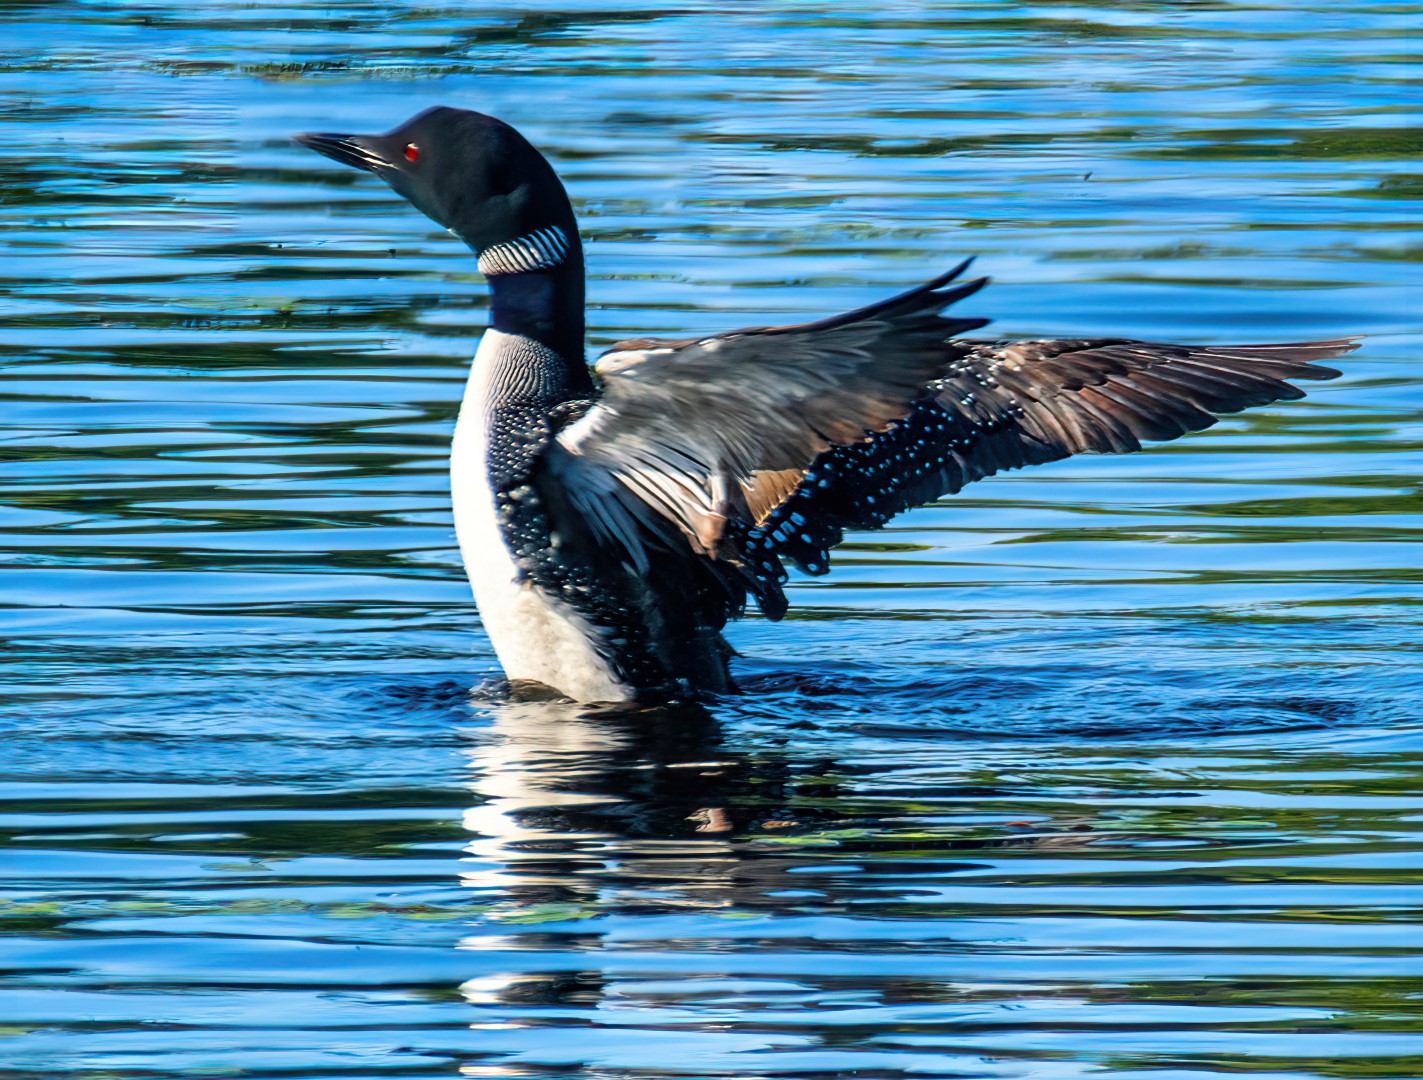 Adirondack Chronicles 2022.4: Lure of the Loons